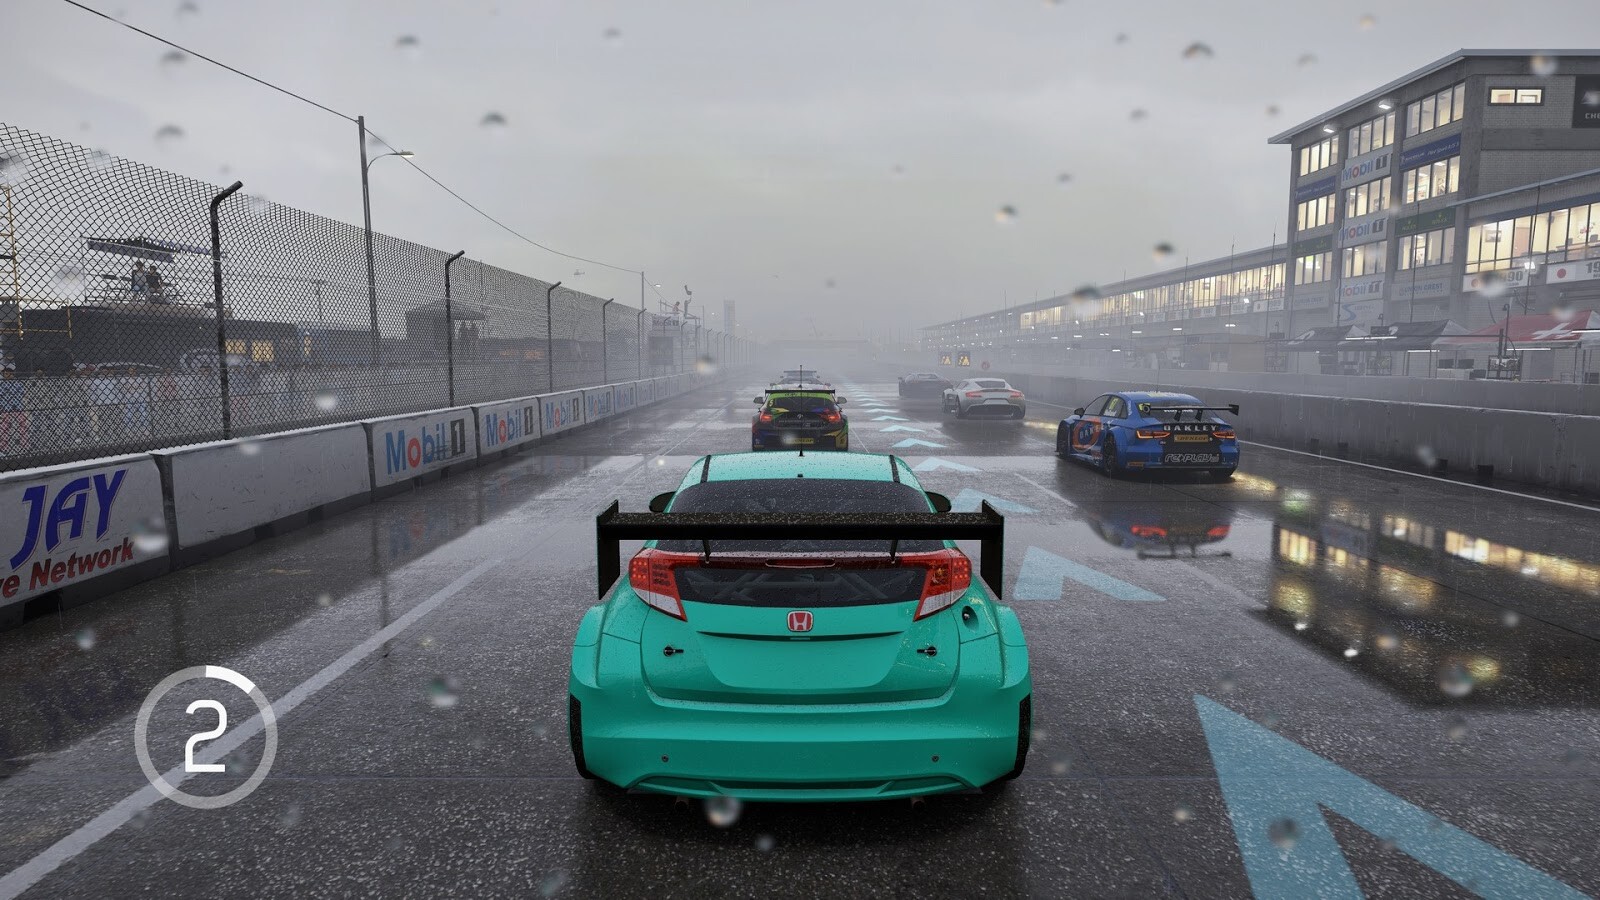 Forza Motorsport 6 review